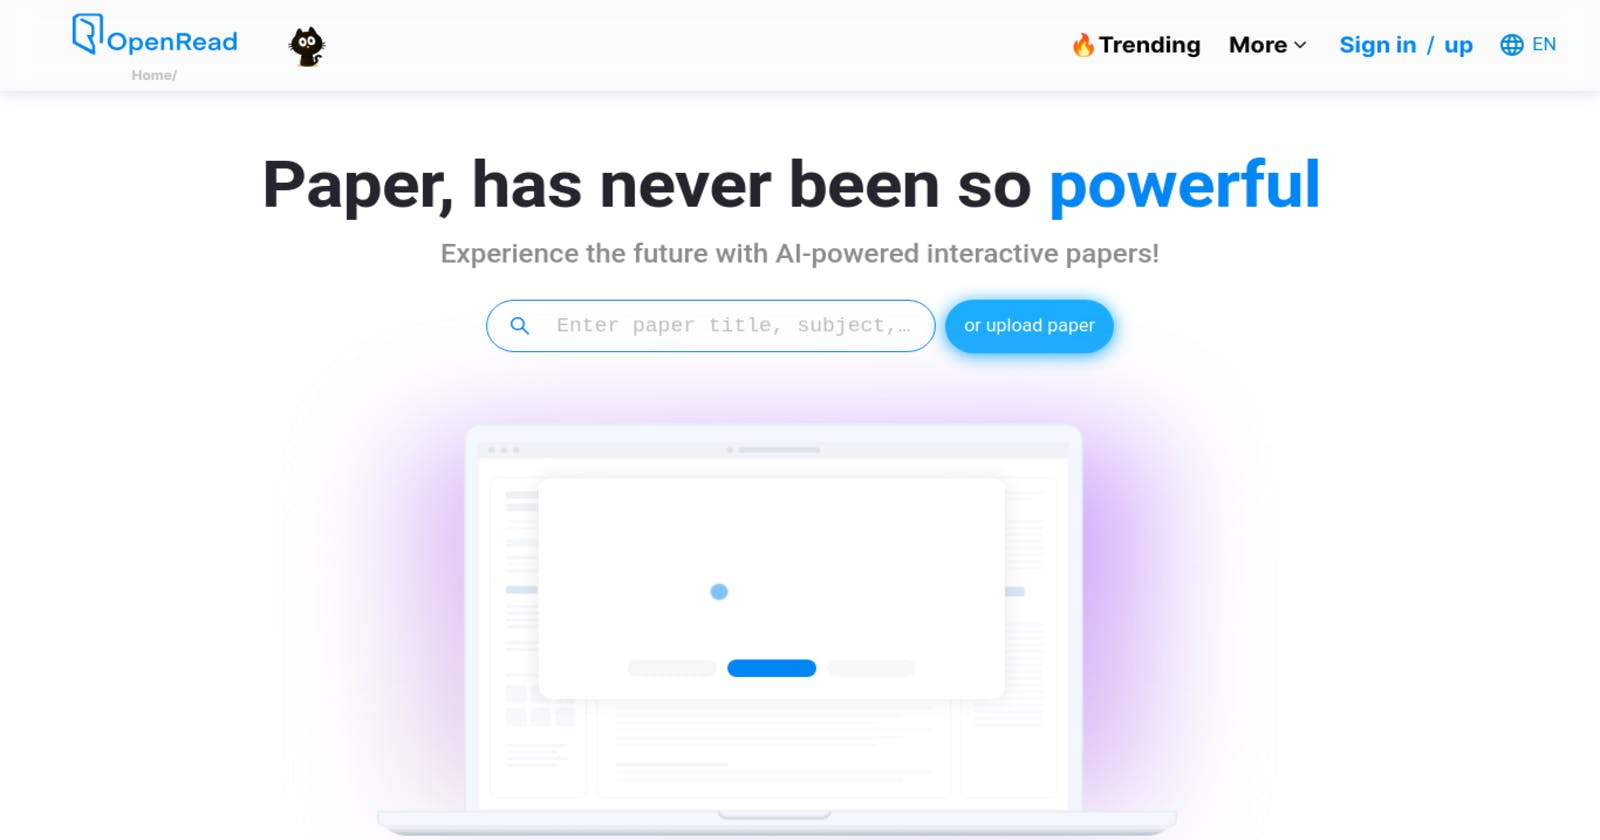 OpenRead - Your Gateway to AI-Powered Interactive Papers